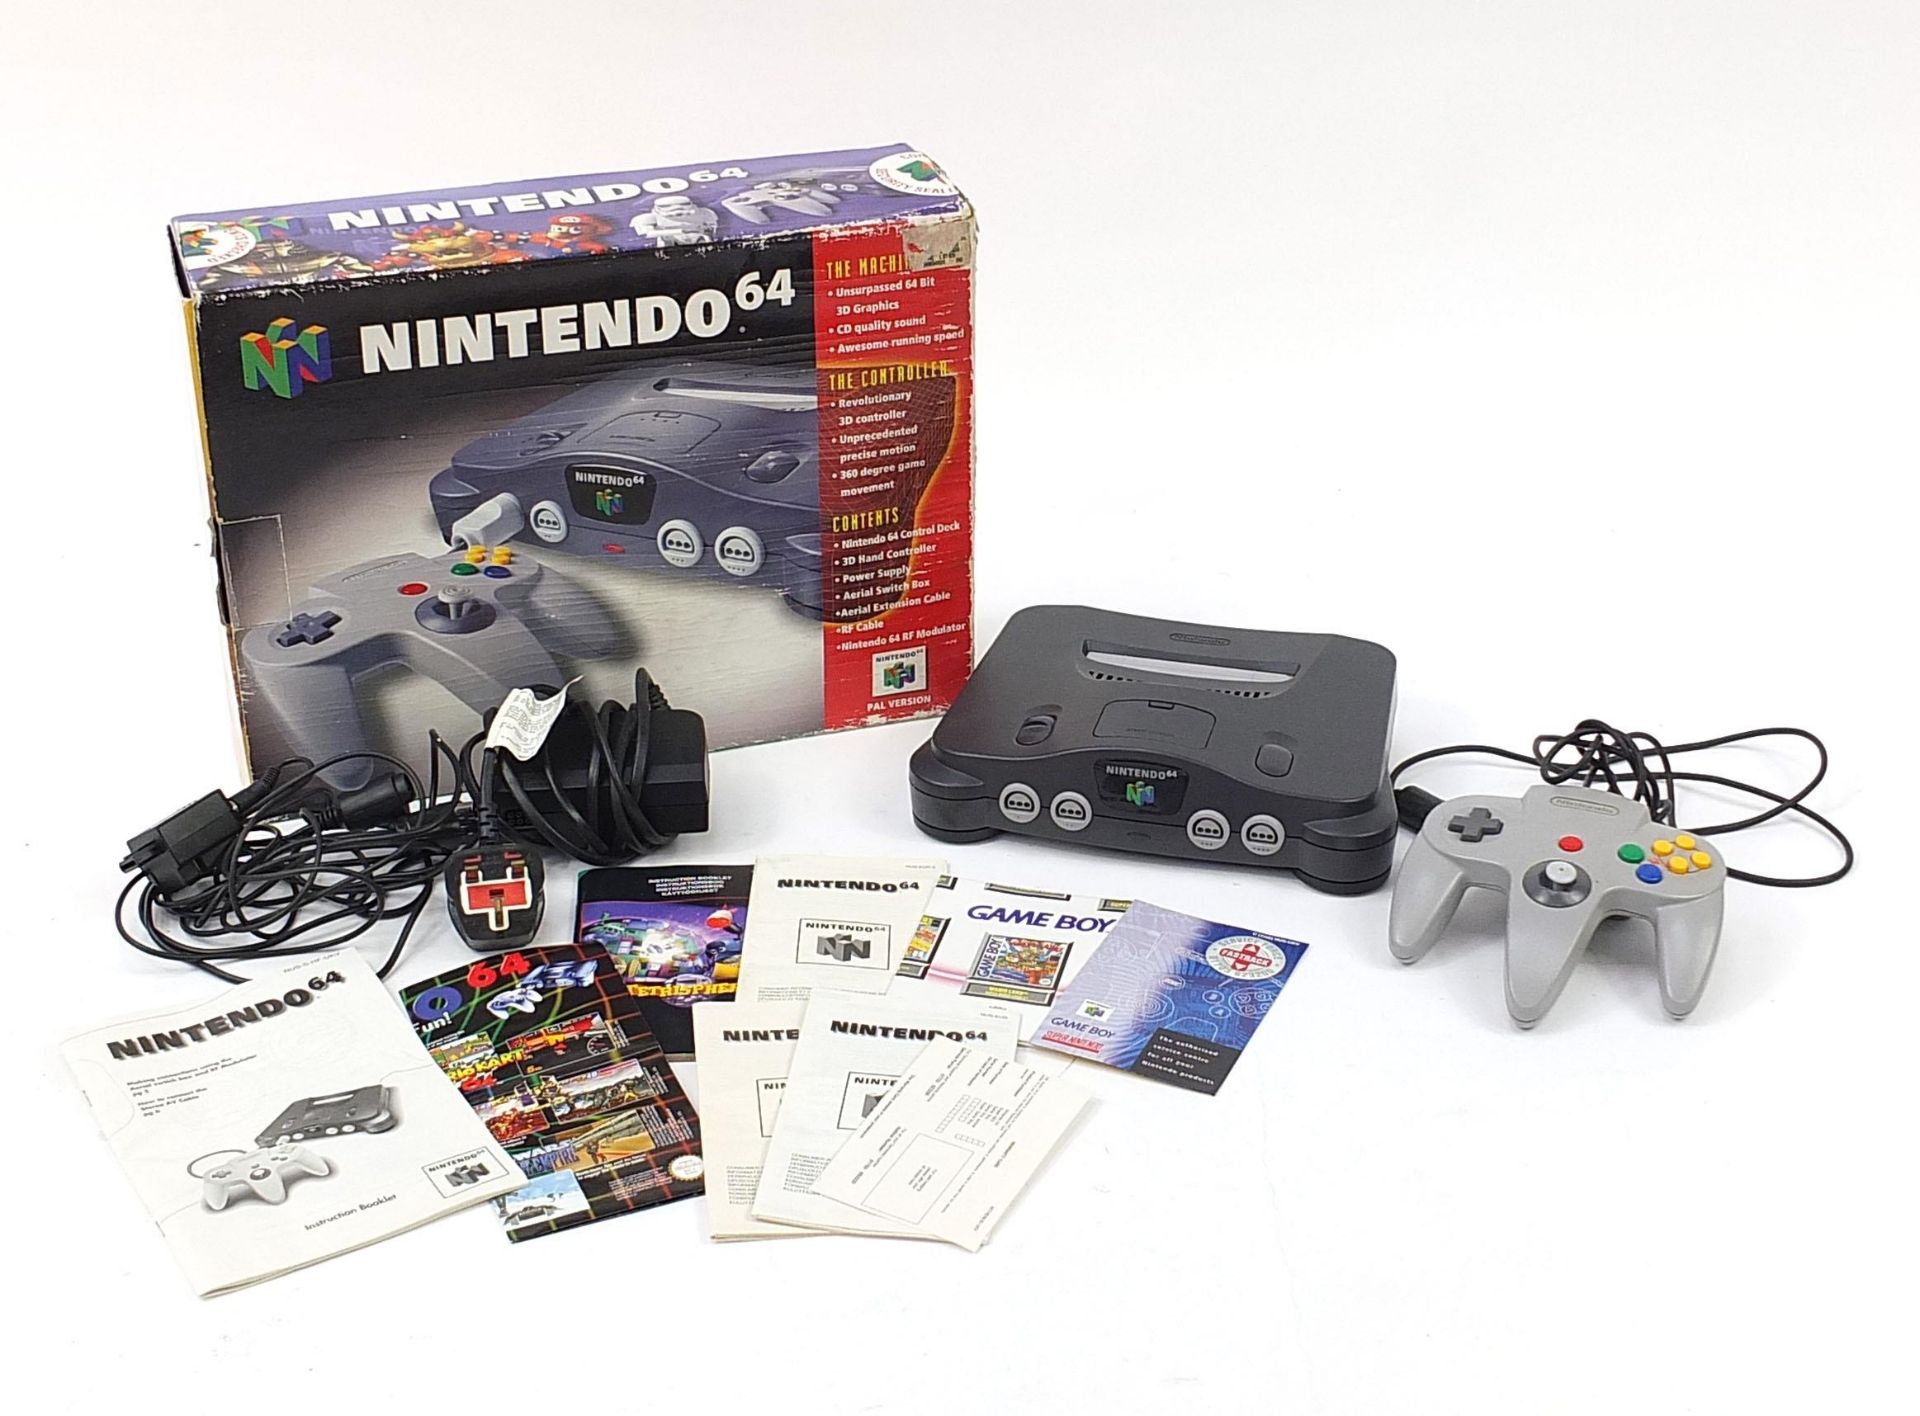 Nintendo 64 games console with box